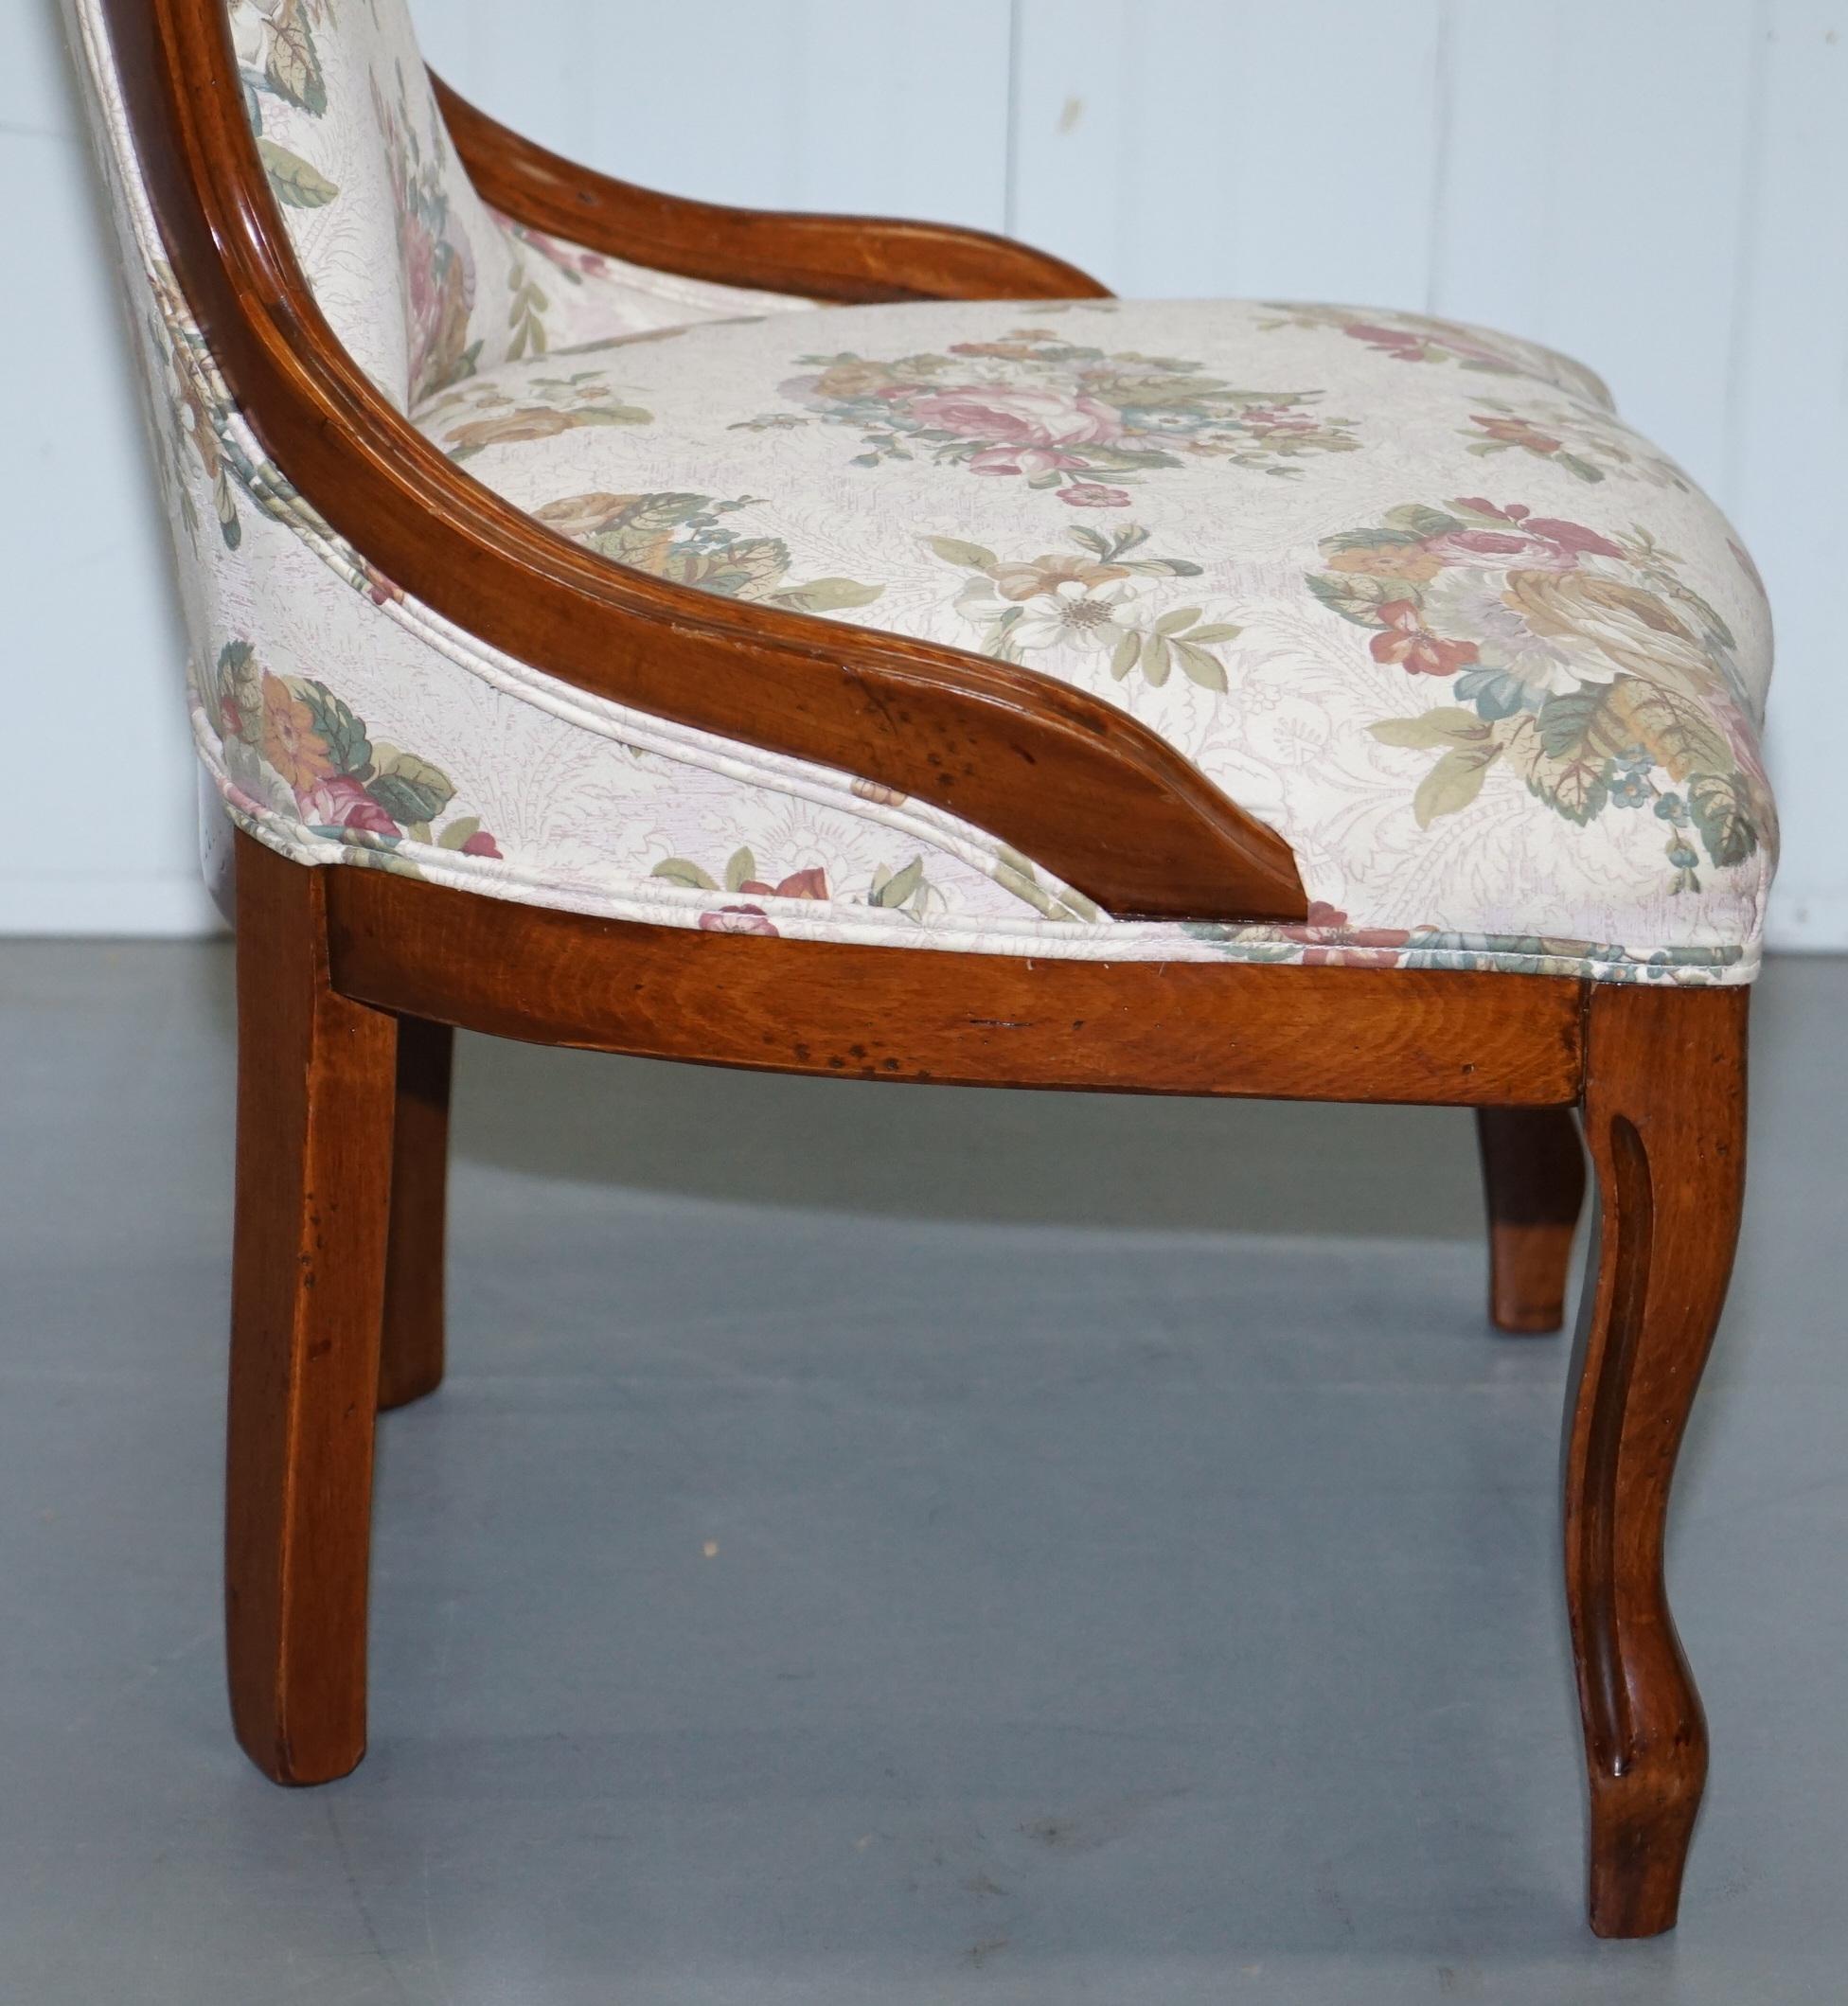 Lovely Victorian Walnut Framed with Floral Upholstery Nursing Chair or Armchair 4